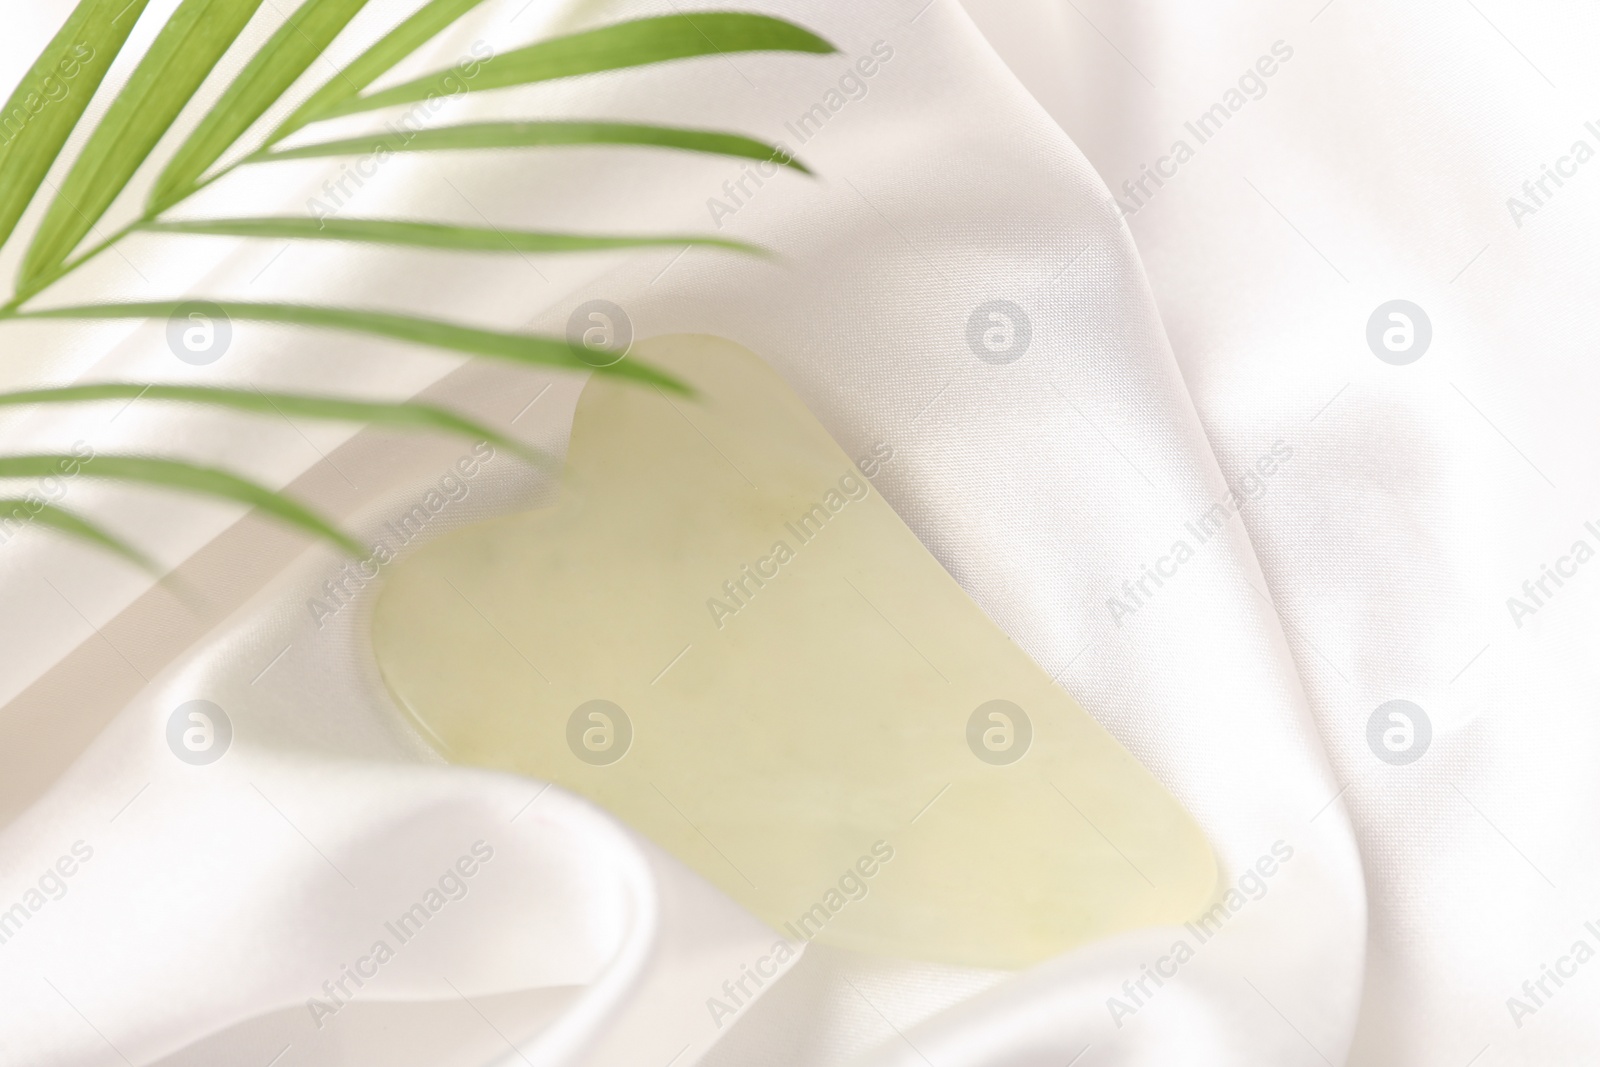 Photo of Jade gua sha tool and green leaf on white fabric, above view